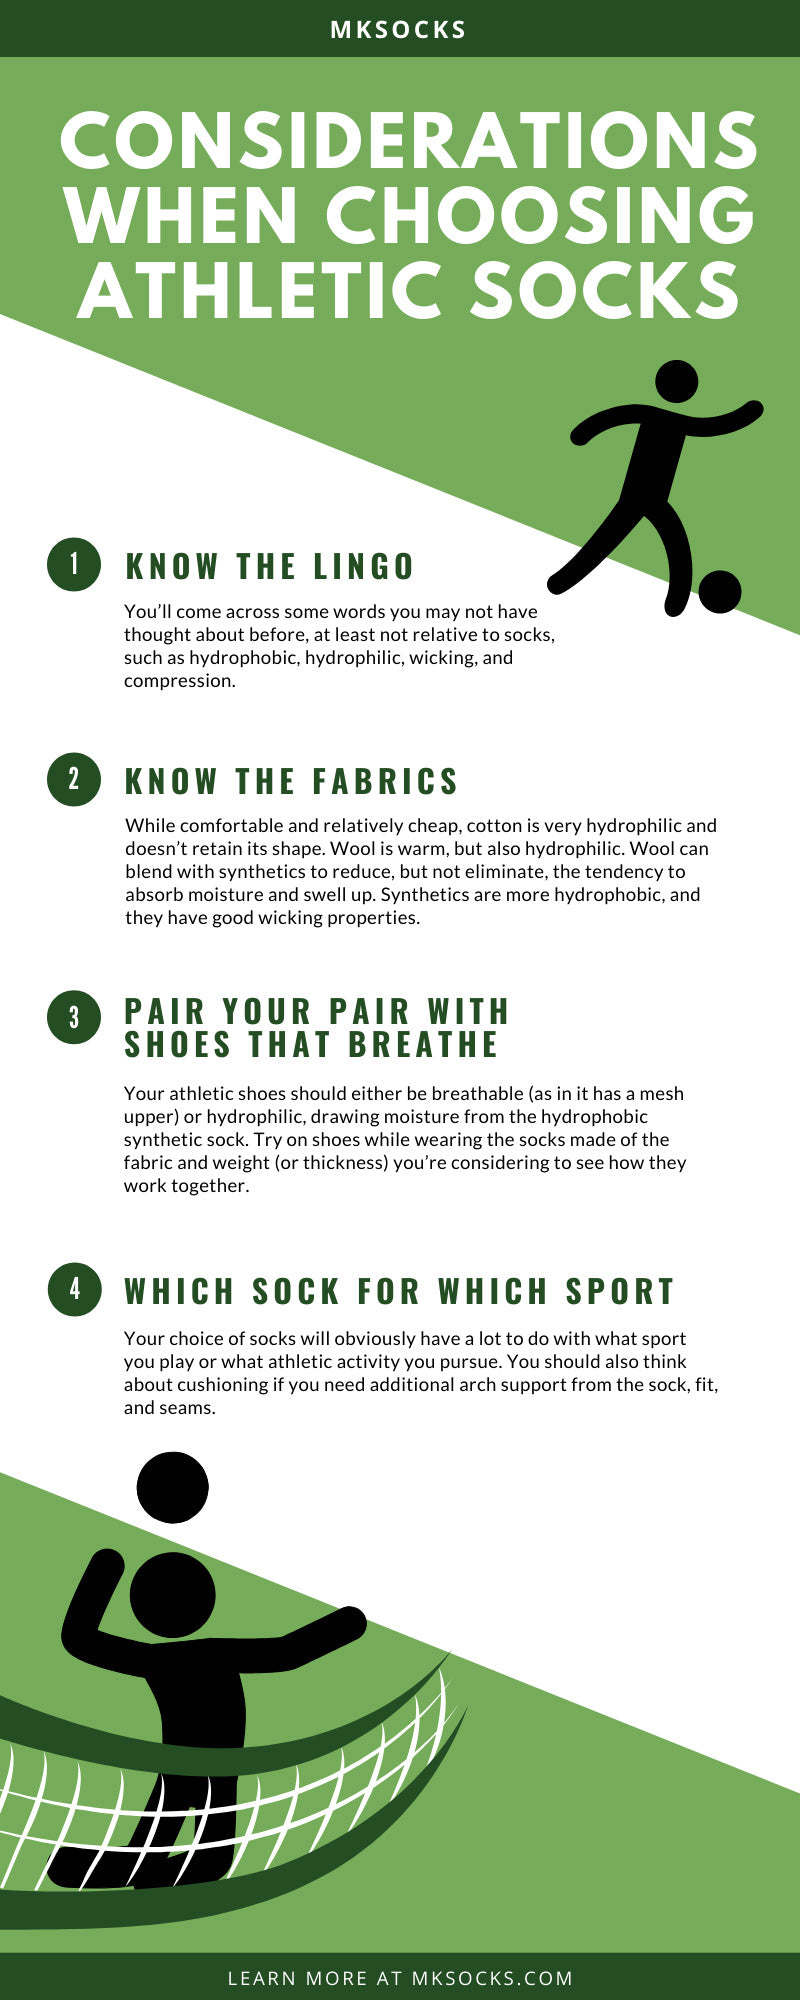 Considerations When Choosing Athletic Socks infographic